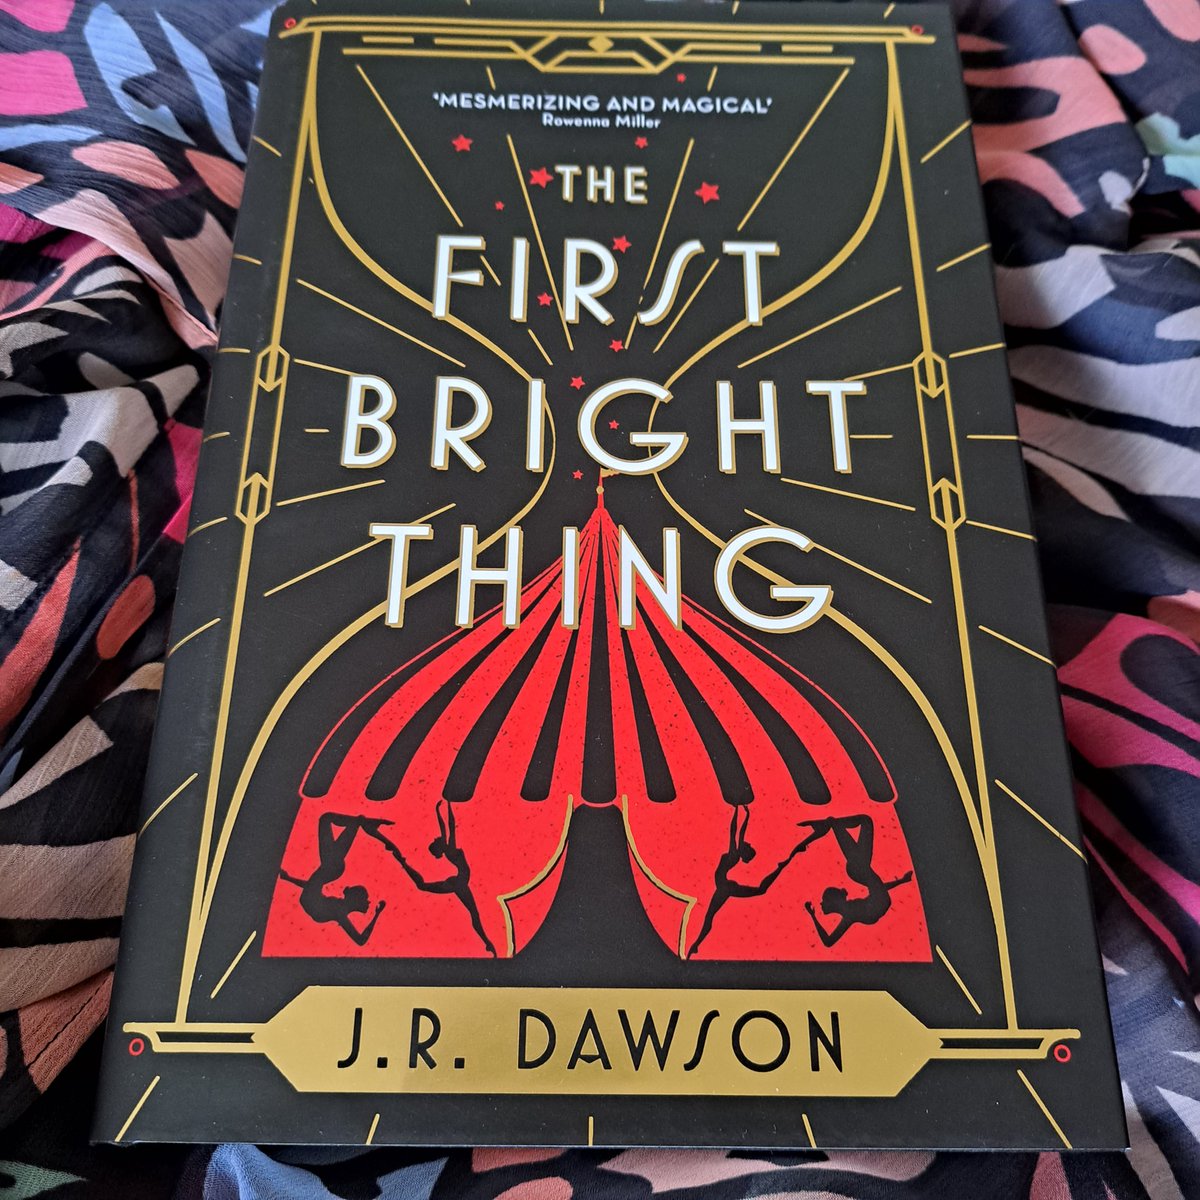 Blog tour. ⭐️⭐️⭐️⭐️
Absolutely loved this one. Thanks to @BlackCrow_PR
for organising.  Full review on Insta.
(AD/PR)
#TheFirstBrightThing
instagram.com/p/CuPONP6IzjB/…